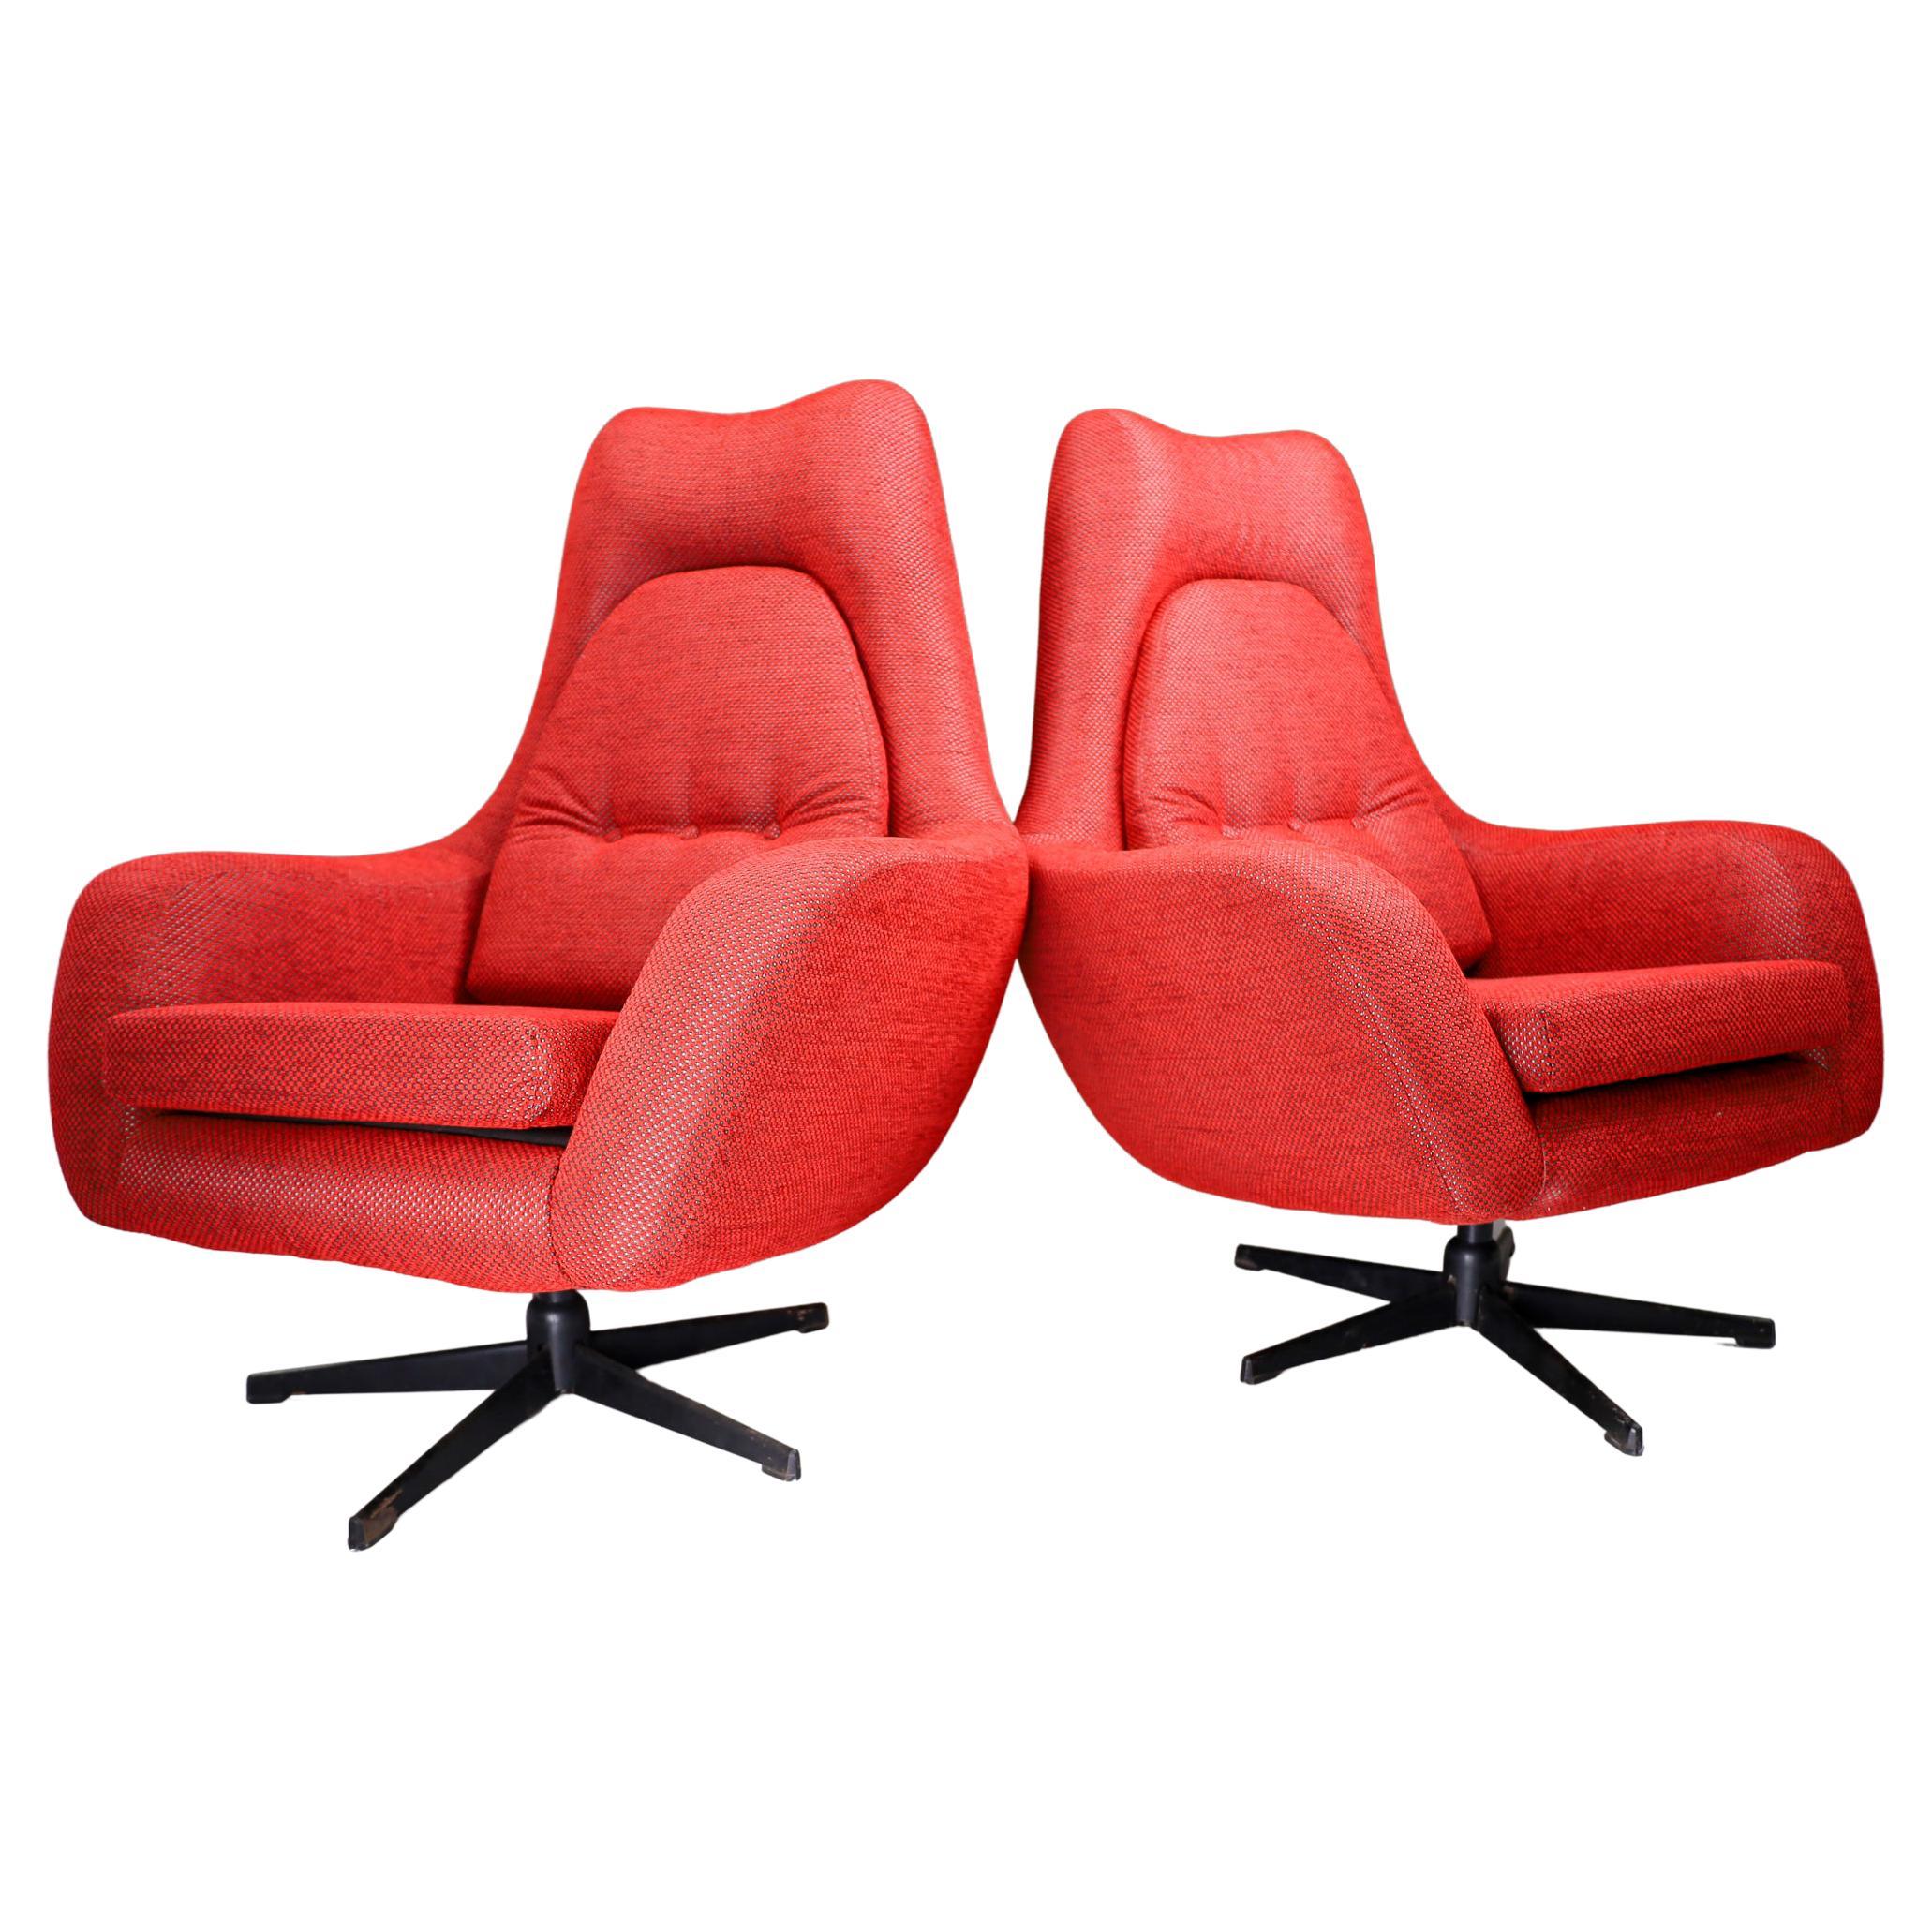 Pair of Swivel Chairs in New Reupholstered Red Fabric, Czech Republic 1970 For Sale